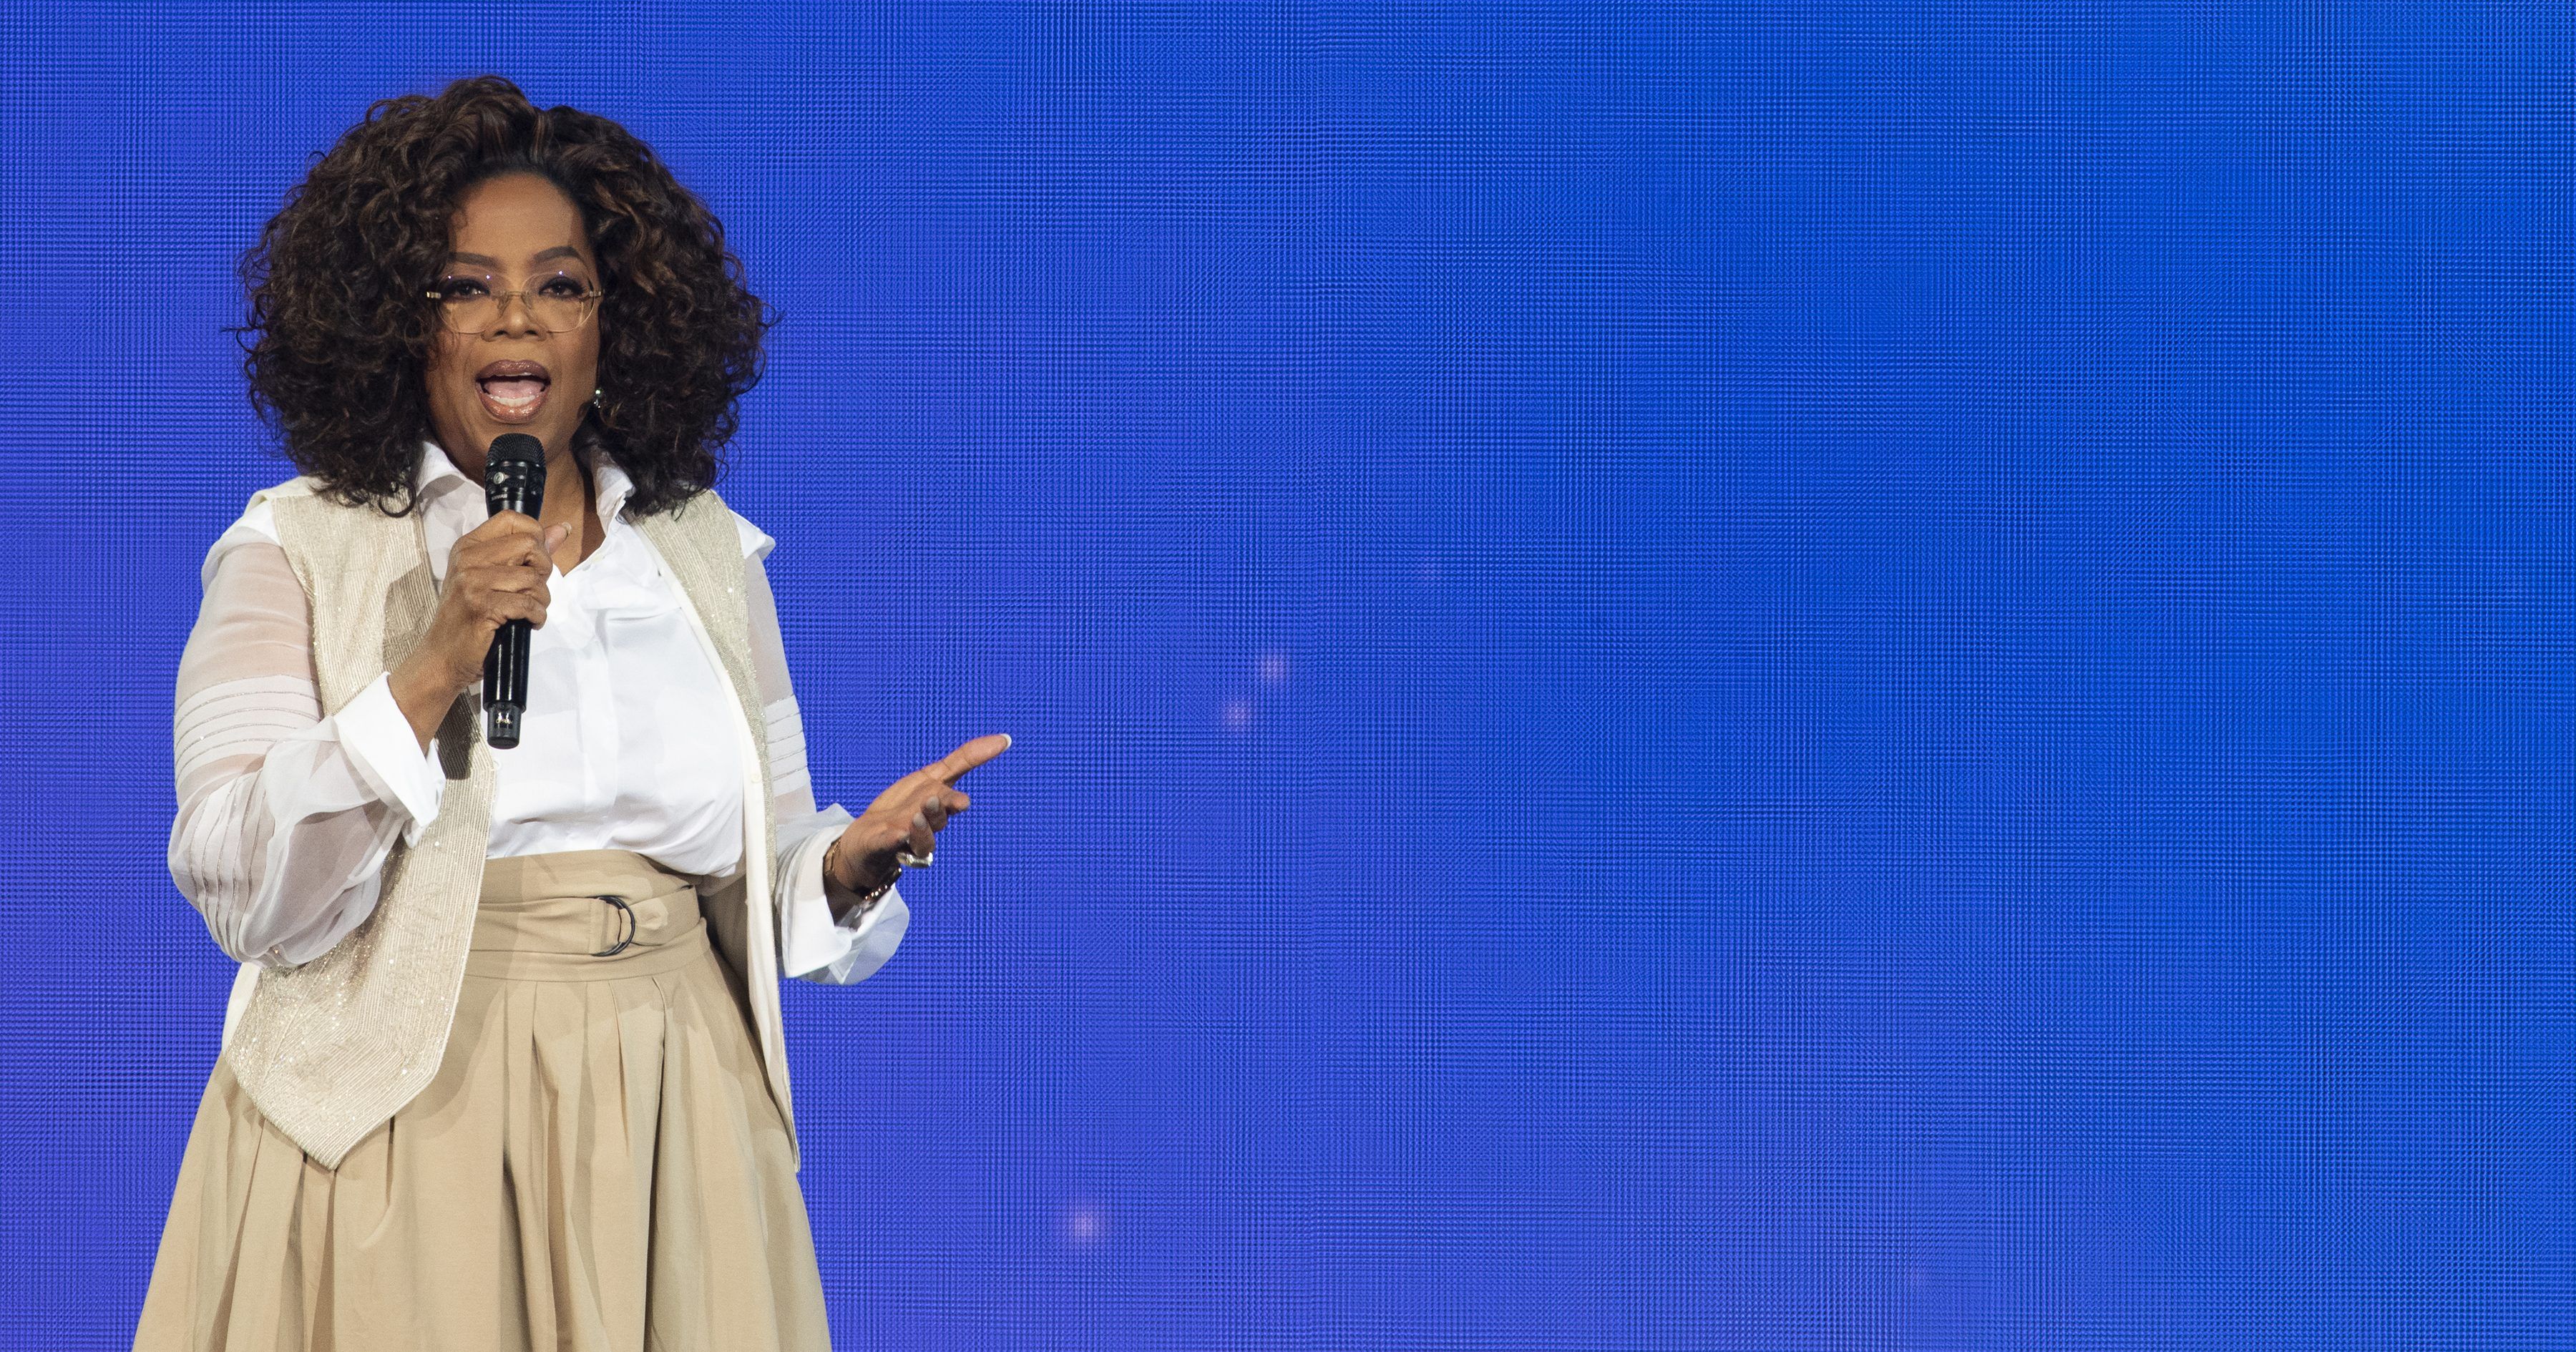 DENVER, COLORADO - MARCH 07: Oprah Winfrey speaks during Oprah's 2020 Vision: Your Life in Focus Tour presented by WW (Weight Watchers Reimagined) at Pepsi Center on March 07, 2020 in Denver, Colorado. (Photo by Tom Cooper/Getty Images)